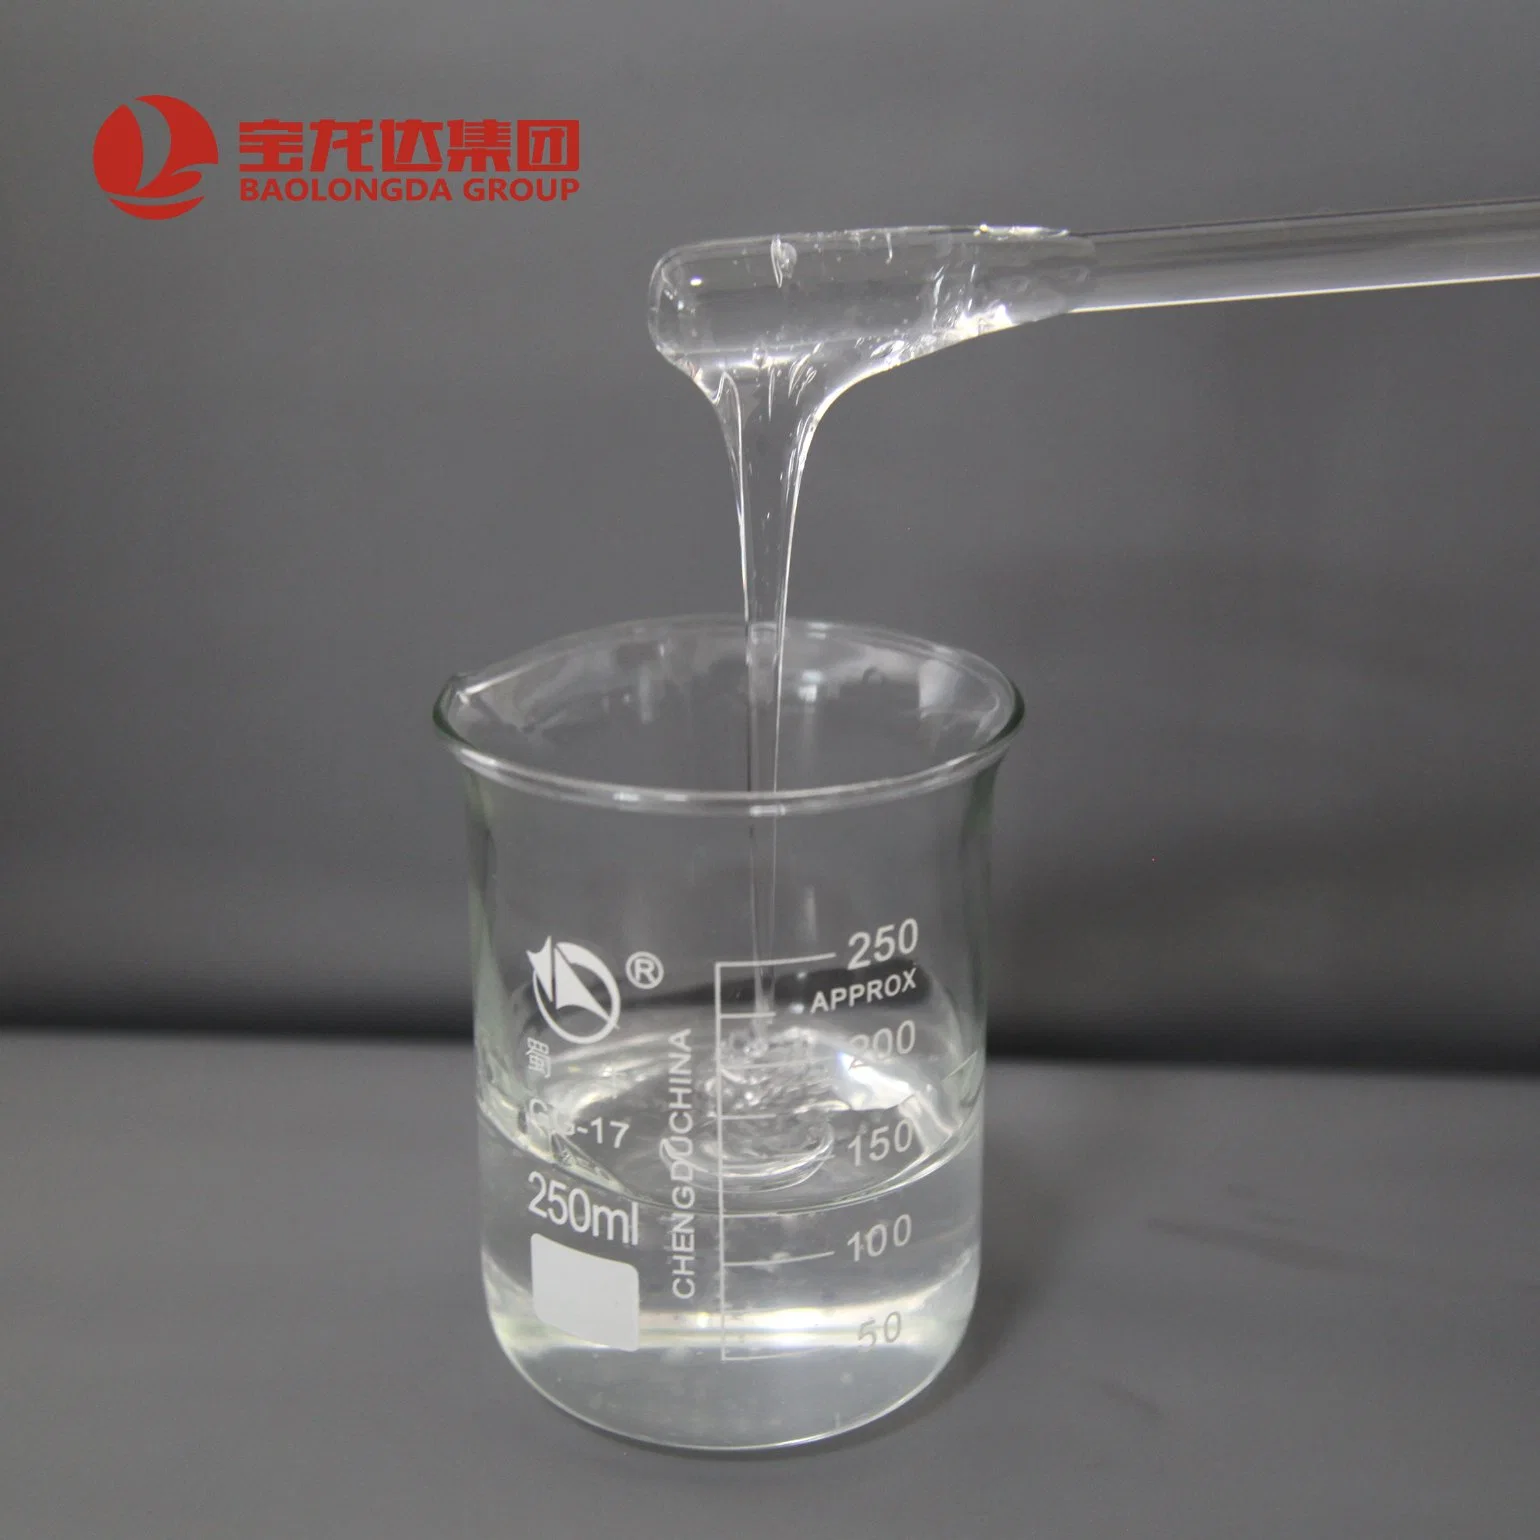 Good Price and Quality Amino Silicone Oil Textile Softener Textile Auxiliaries Amino Silicone Oil